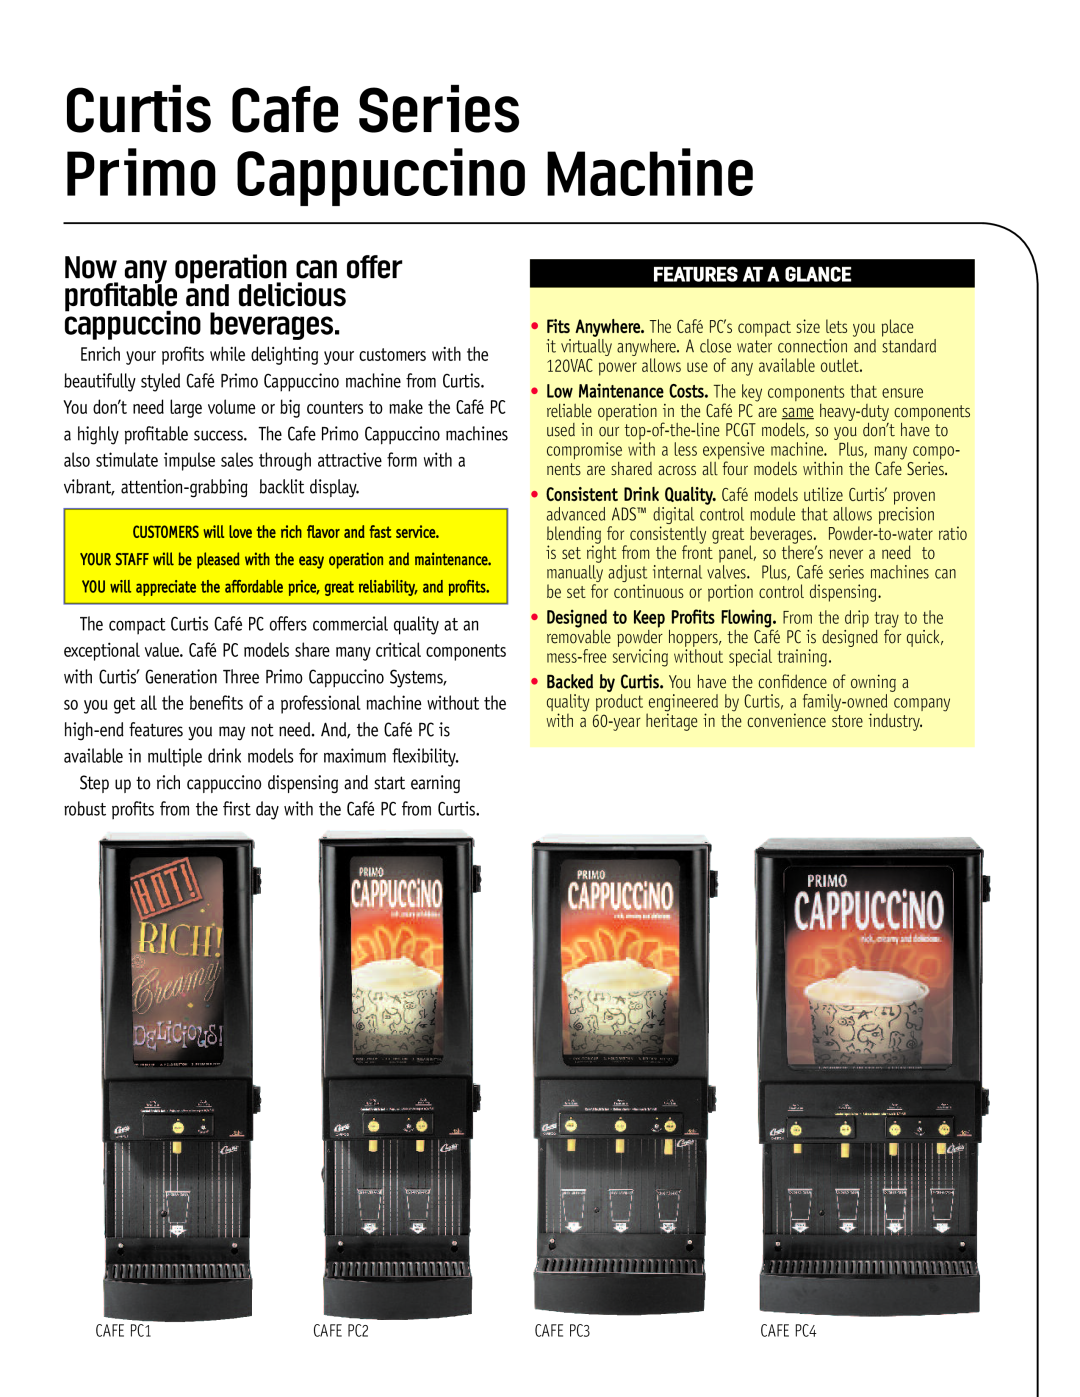 Wibur Curtis Company CAFE PC4, CAFE PC3, CAFE PC1 manual Curtis Cafe Series Primo Cappuccino Machine, Features At A Glance 